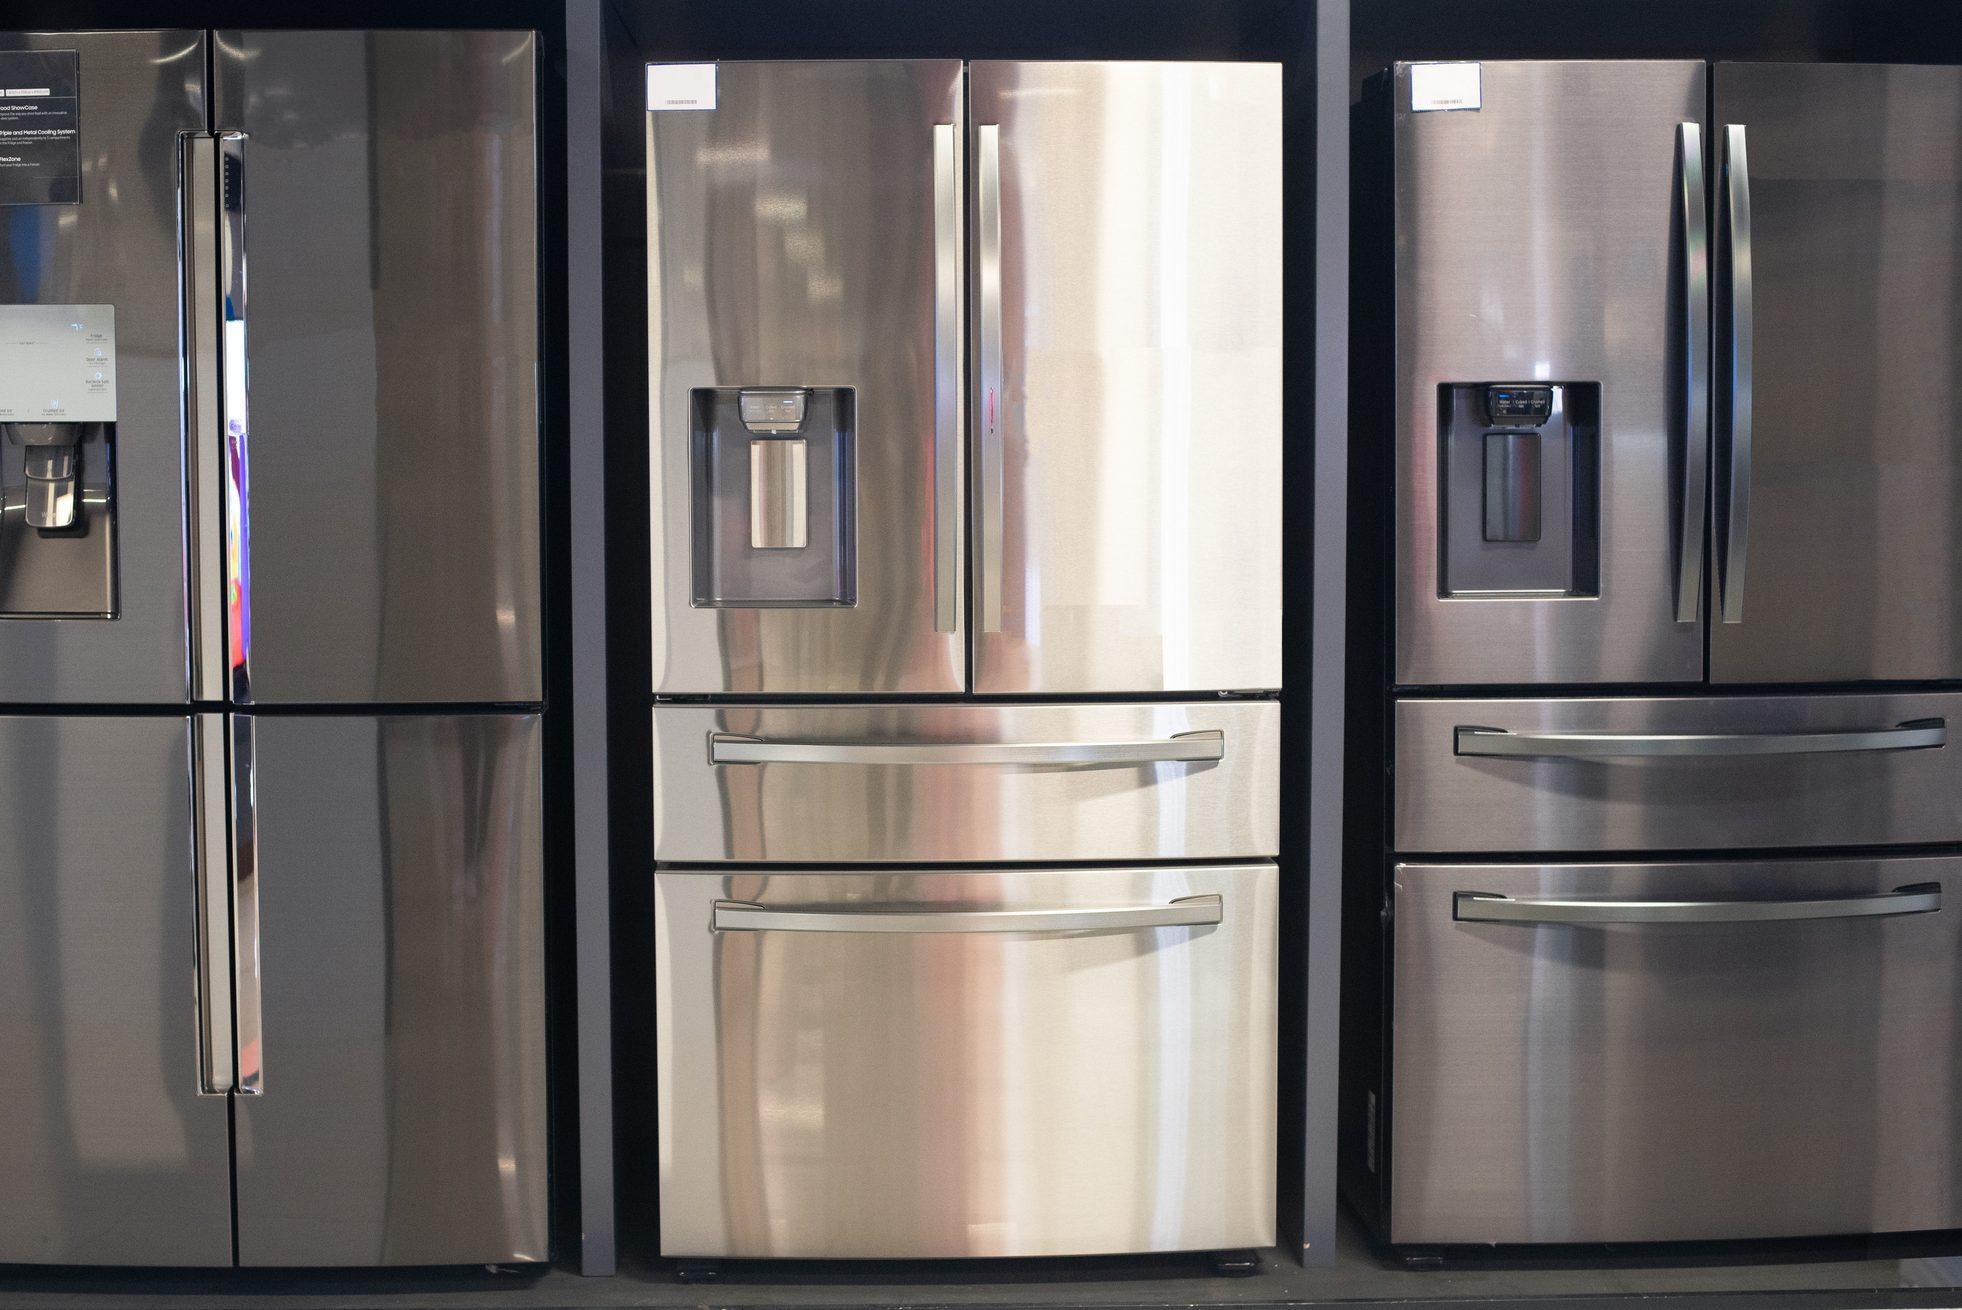 Which Appliances Should You Buy First for Your New Home?